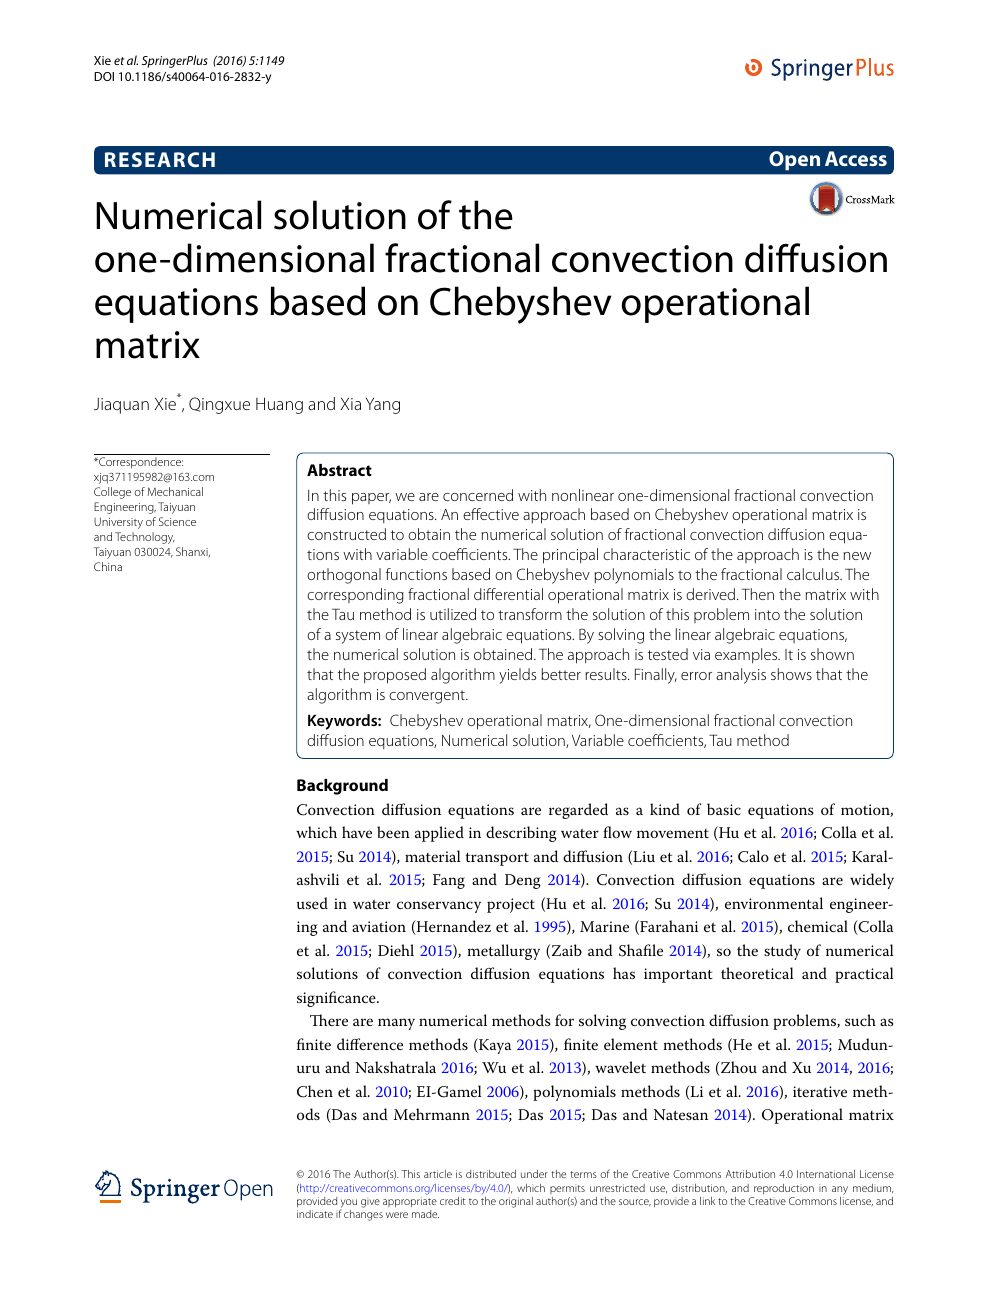 Numerical Solution Of The One Dimensional Fractional Convection Diffusion Equations Based On Chebyshev Operational Matrix Topic Of Research Paper In Mathematics Download Scholarly Article Pdf And Read For Free On Cyberleninka Open